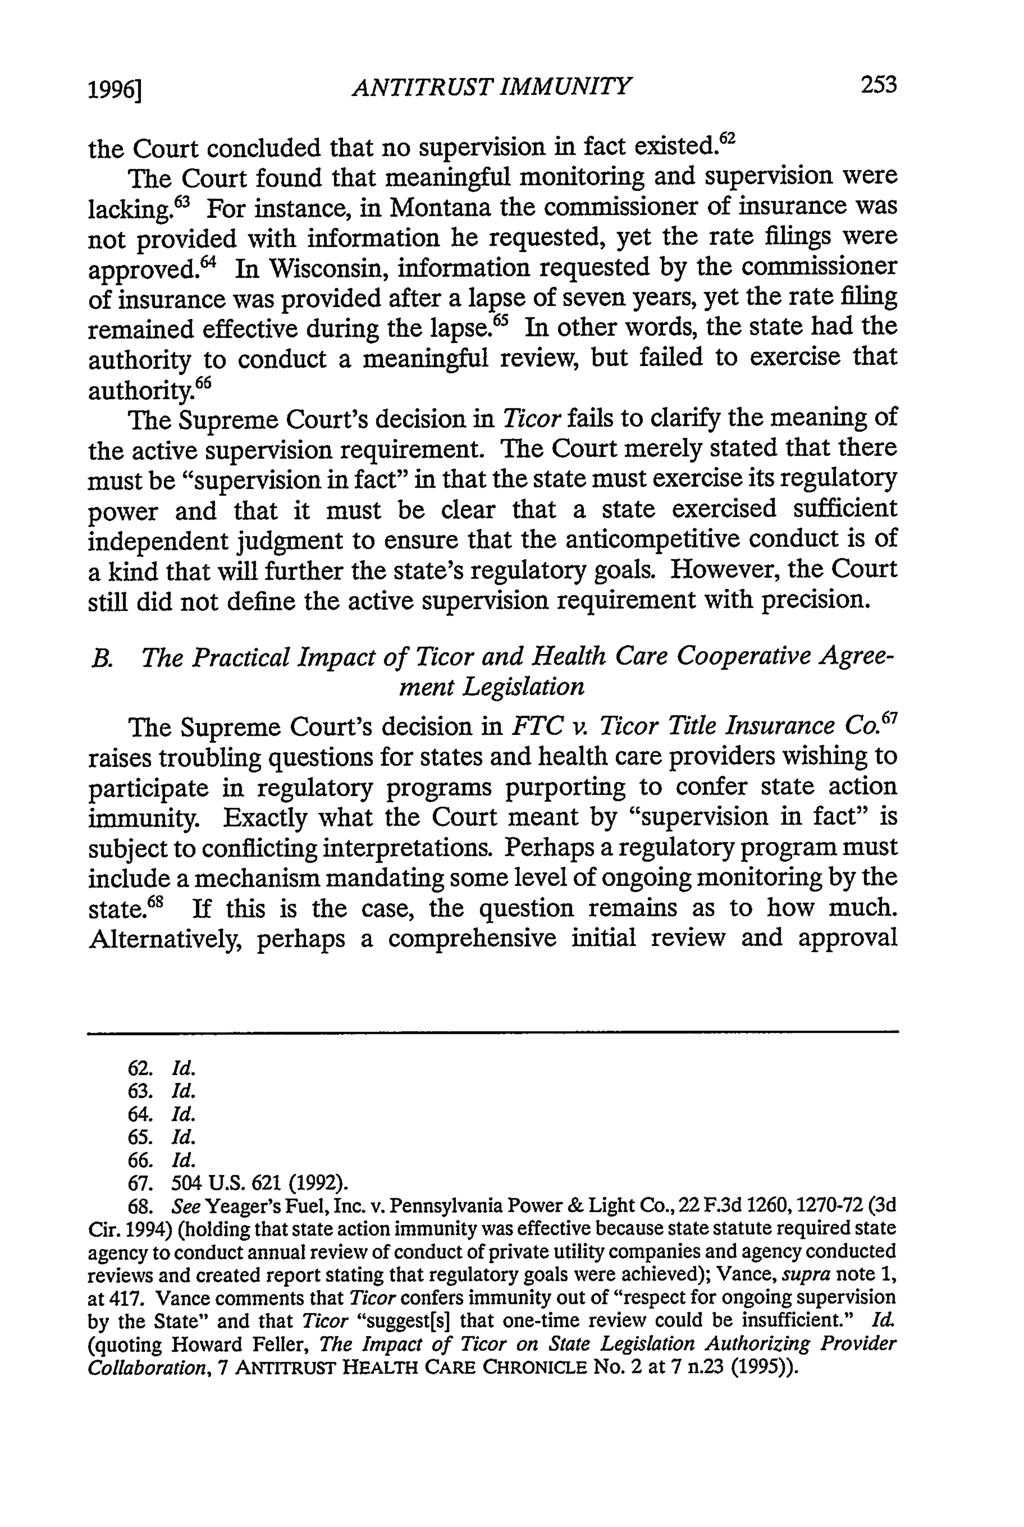 19961 ANTITRUST IMMUNITY the Court concluded that no supervision in fact existed. 62 The Court found that meaningful monitoring and supervision were lacking.